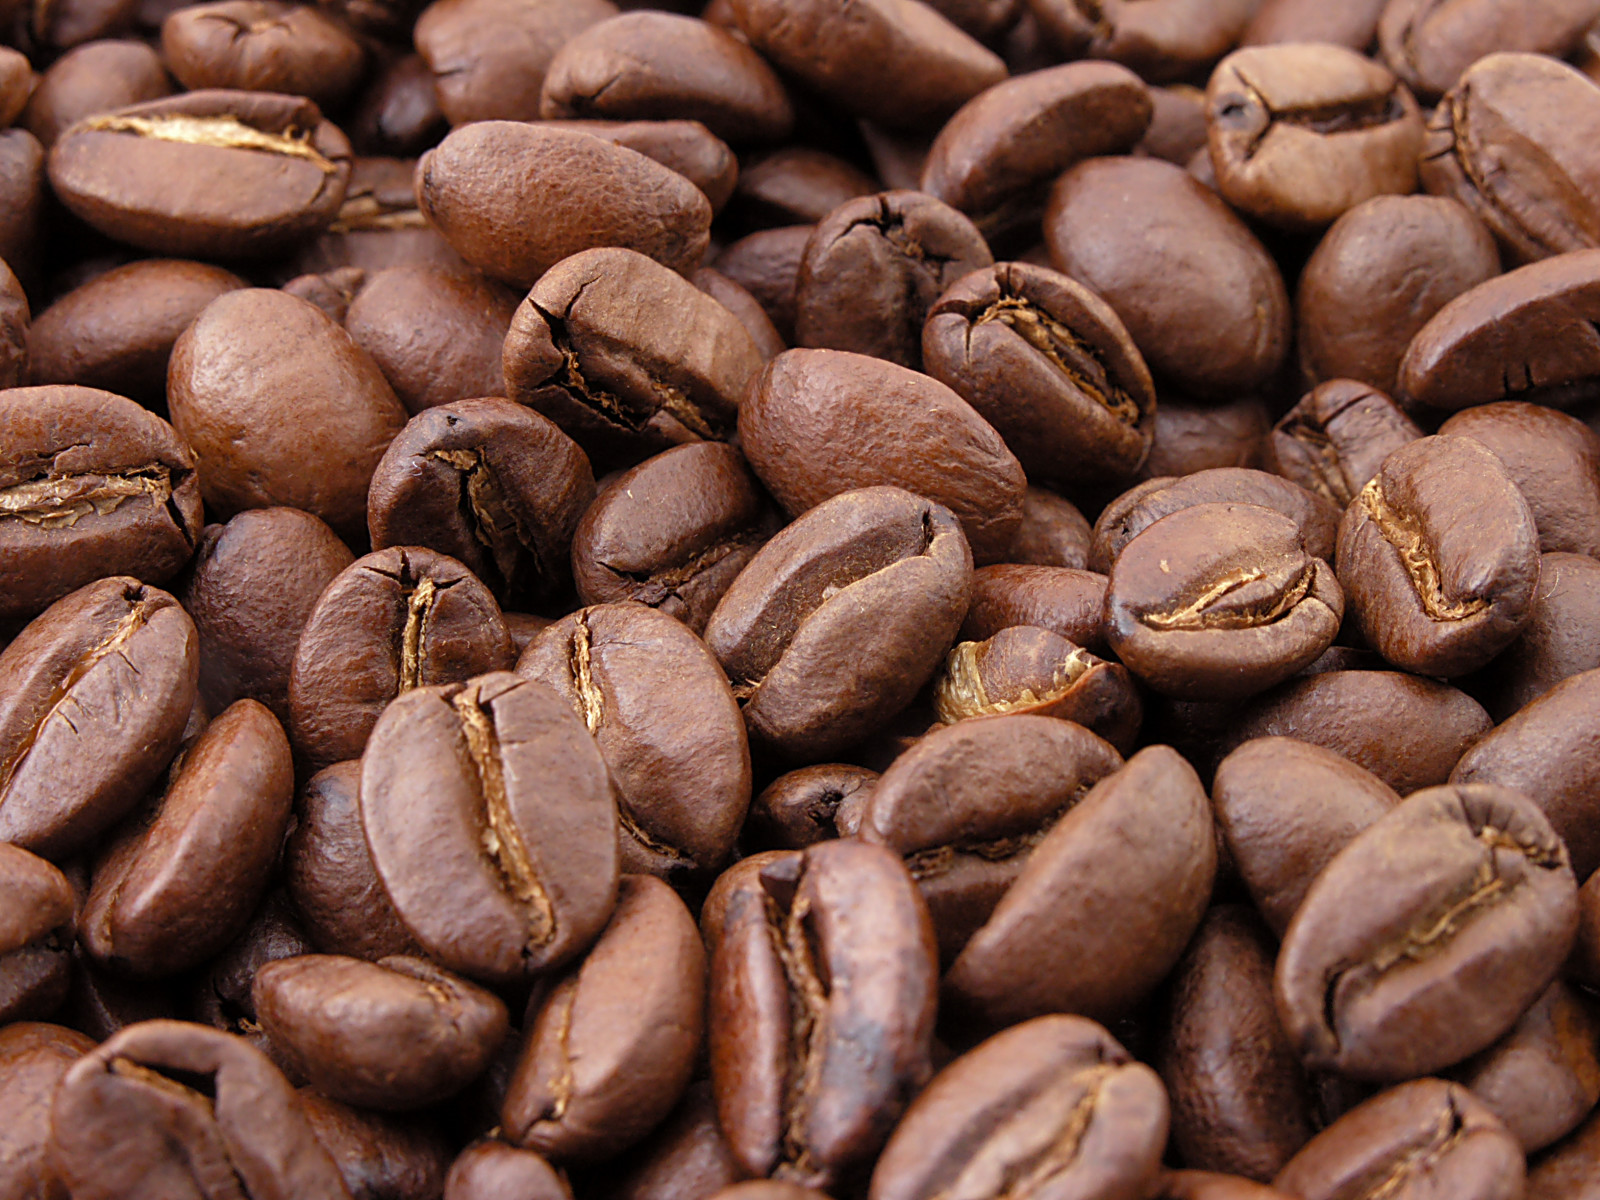 What is a coffee roaster?